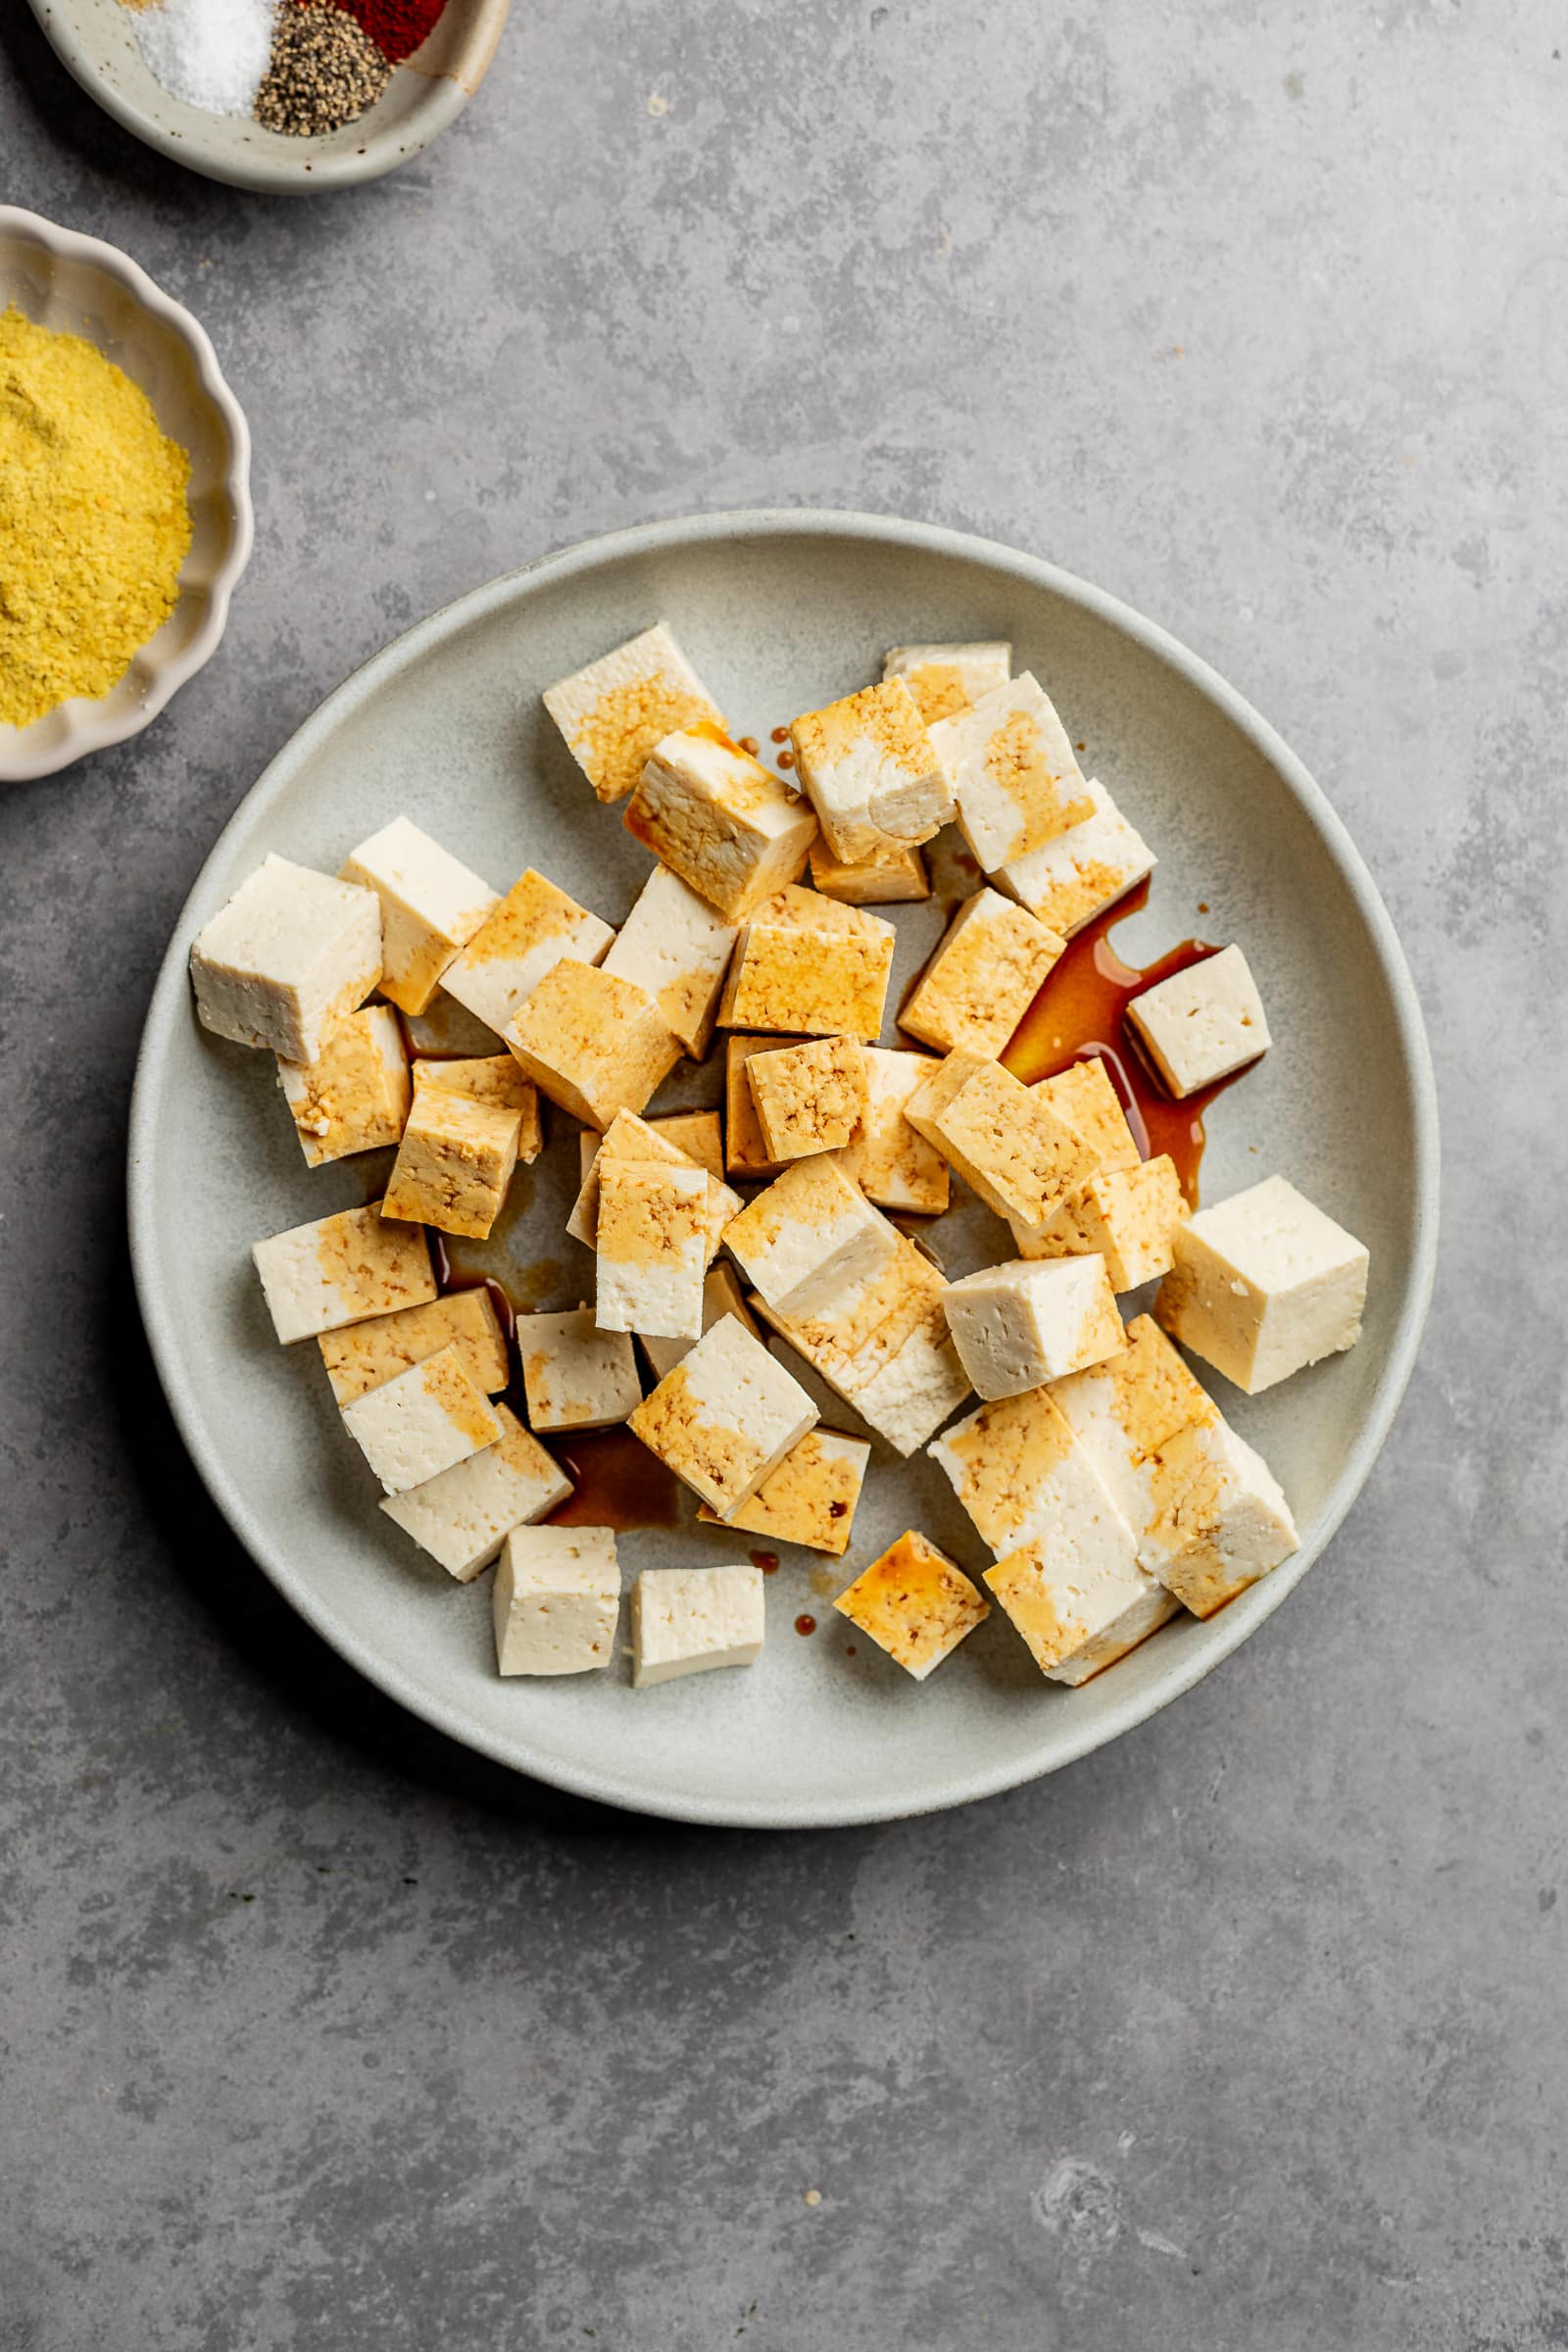 Tofu cubes in a shallow bowl with soy sauce over the top.